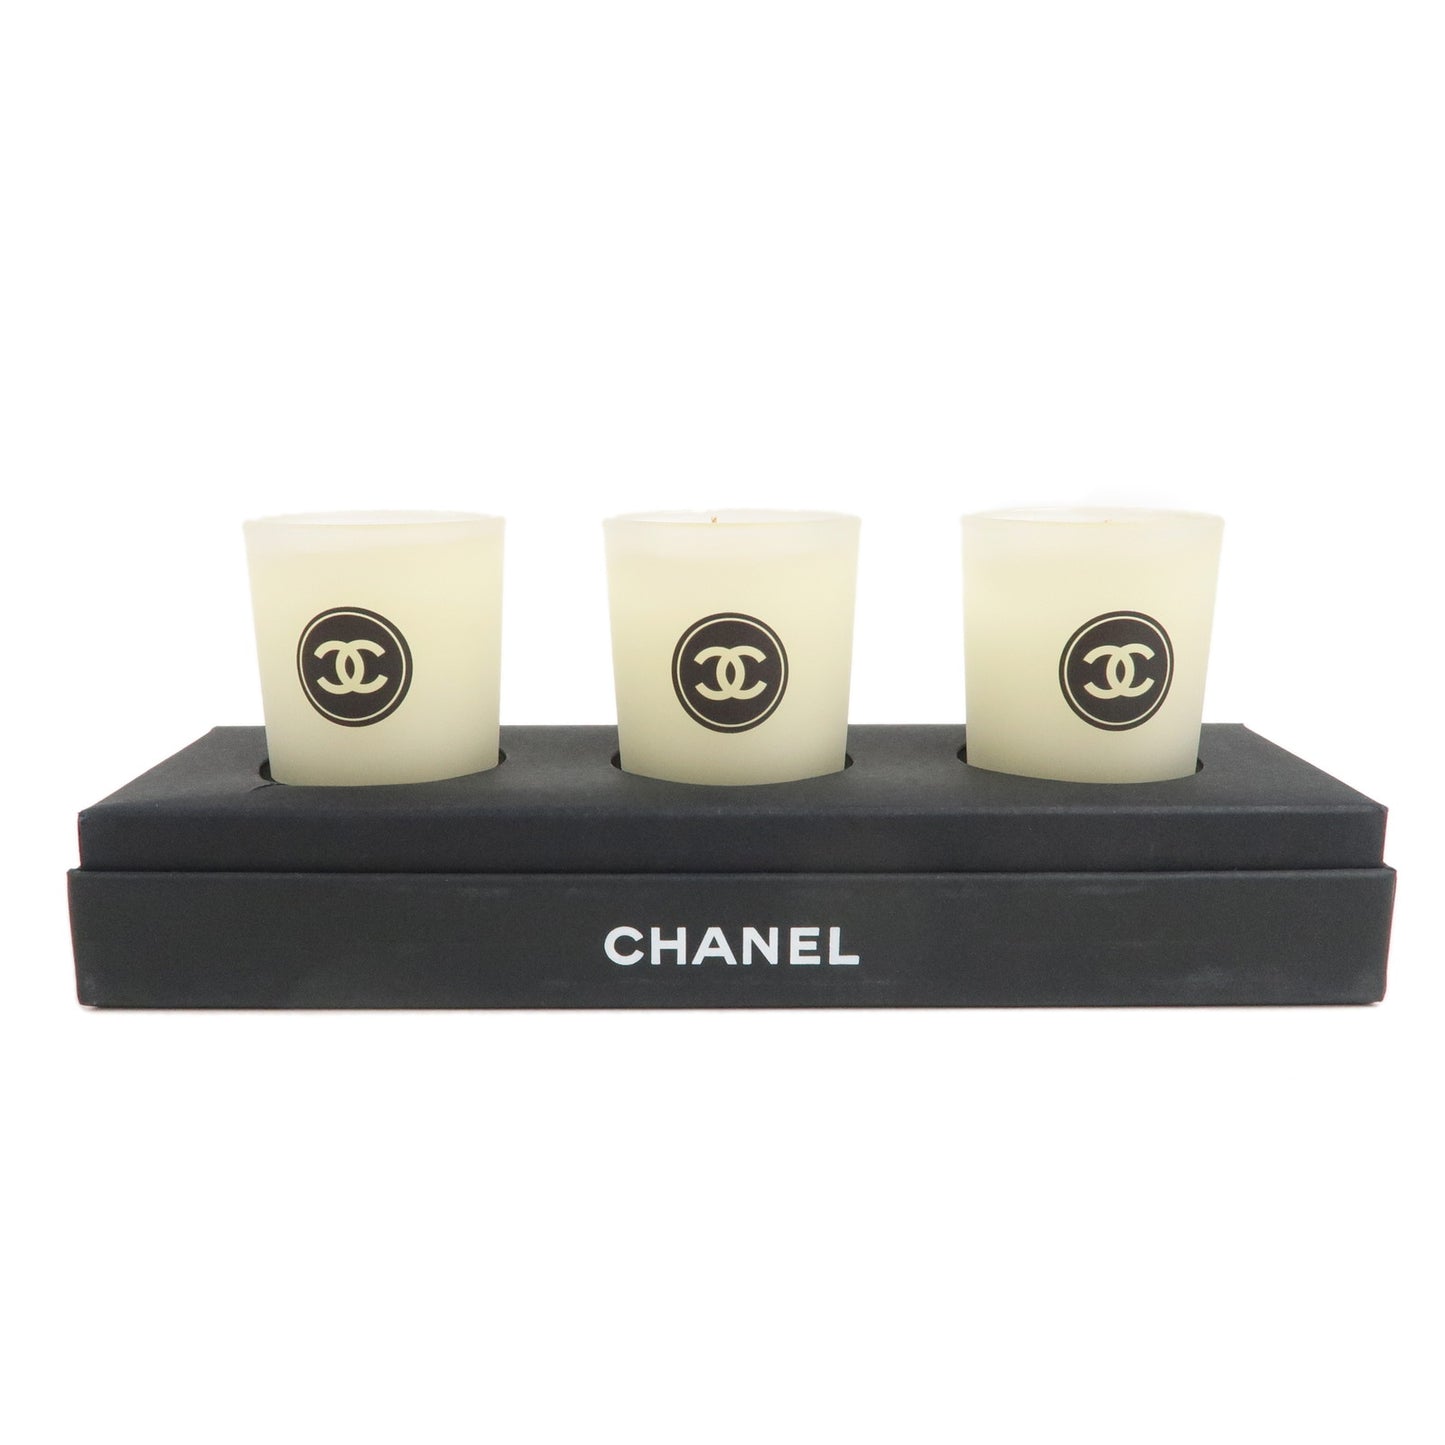 [Used] CHANEL novelty mini aroma candle set of 3 with Box